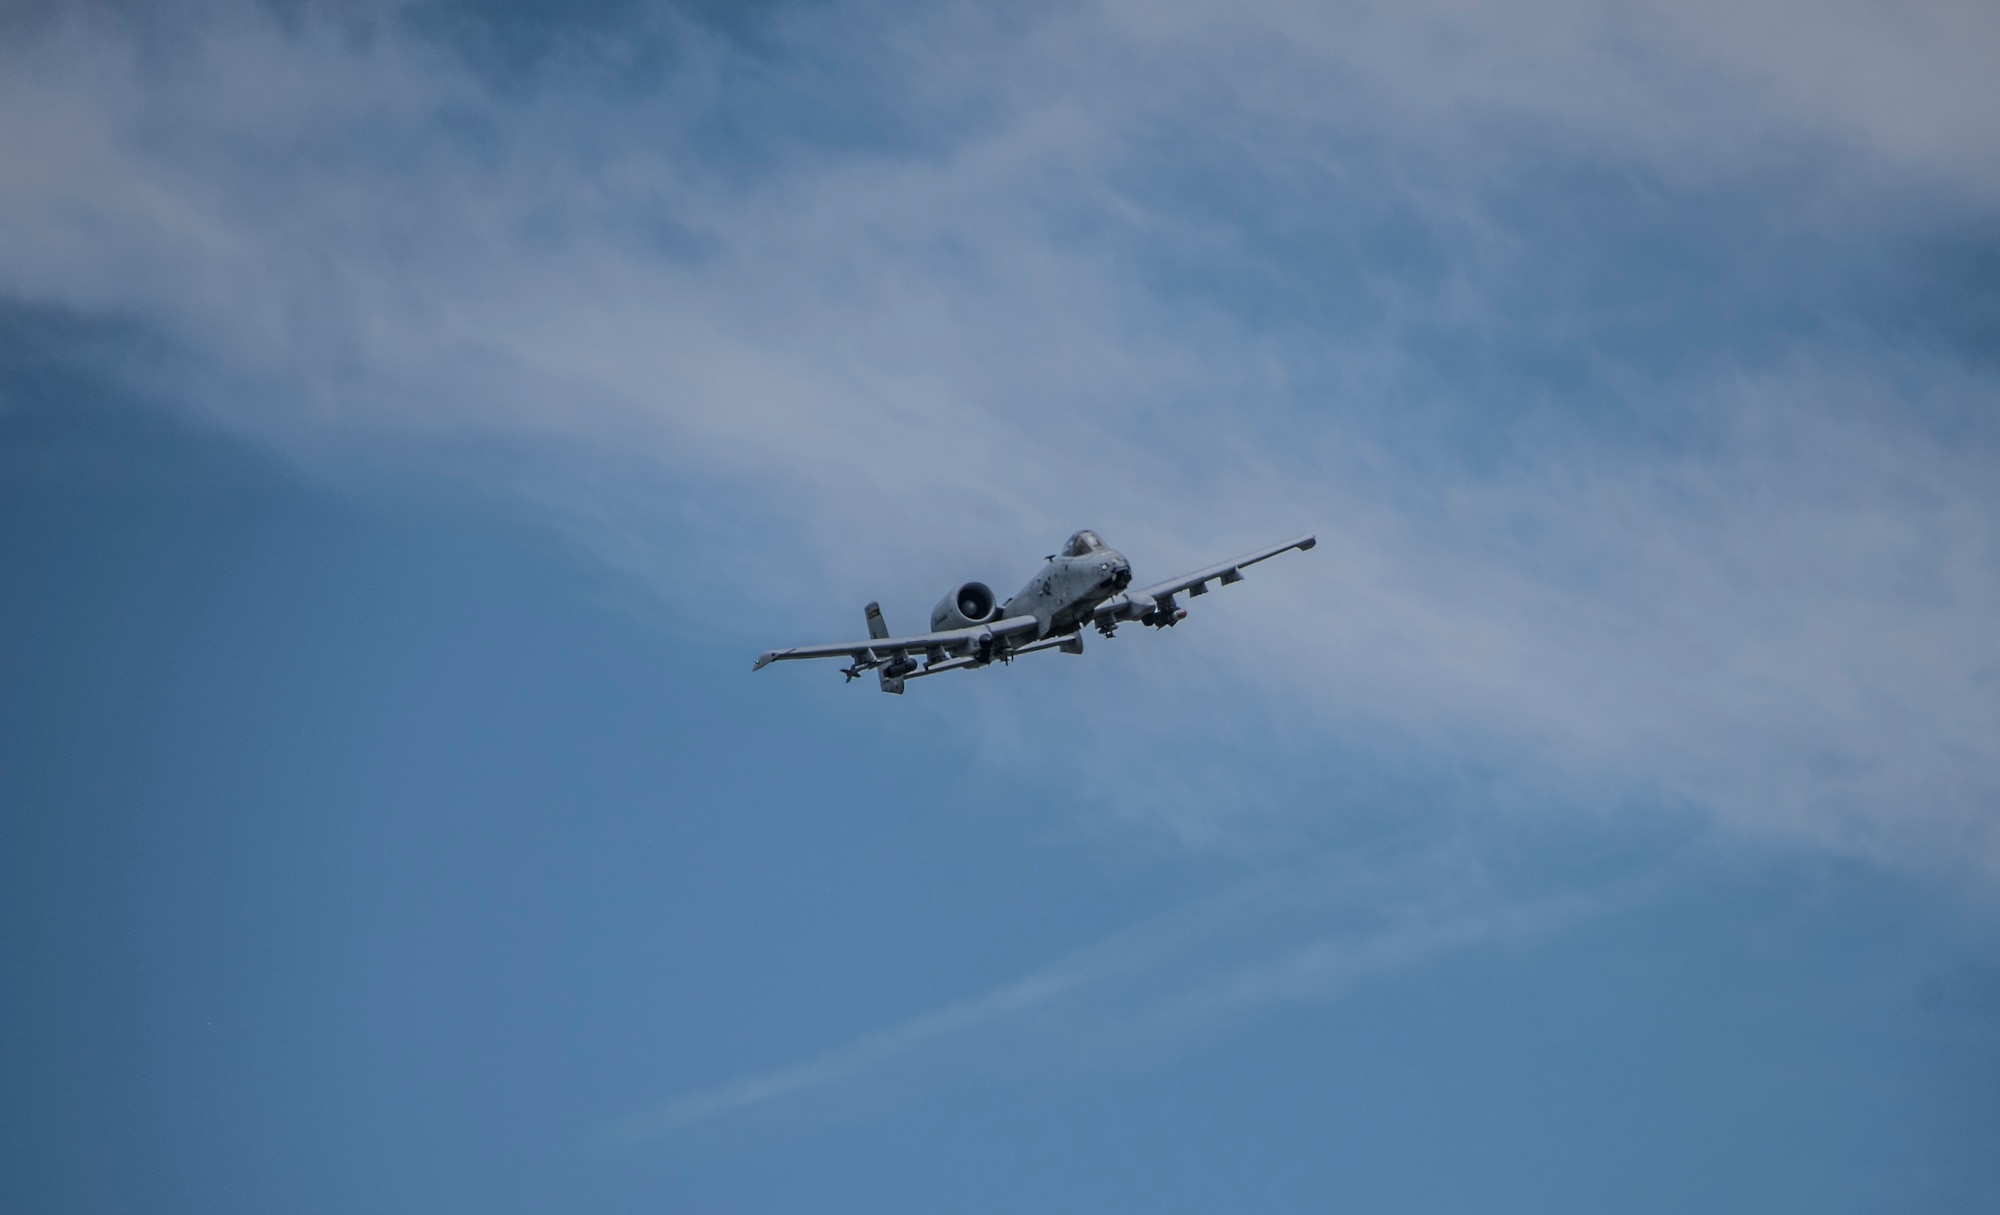 An A-10C Thunderbolt II fighter jet from the 122nd Fighter Wing, Fort Wayne, Indiana flies during a combat search and rescue training exercise in Miami County on June 18, 2020. The mock scenario utilized a UH-60 Black Hawk helicopter from the Gary Army Aviation Support Facility and multiple A-10C Thunderbolt II fighter jets to prepare guardsmen for the safe retrieval of personnel from a downed aircraft inside hostile territory. (U.S. Air National Guard photo by Staff Sgt. Justin Andras)